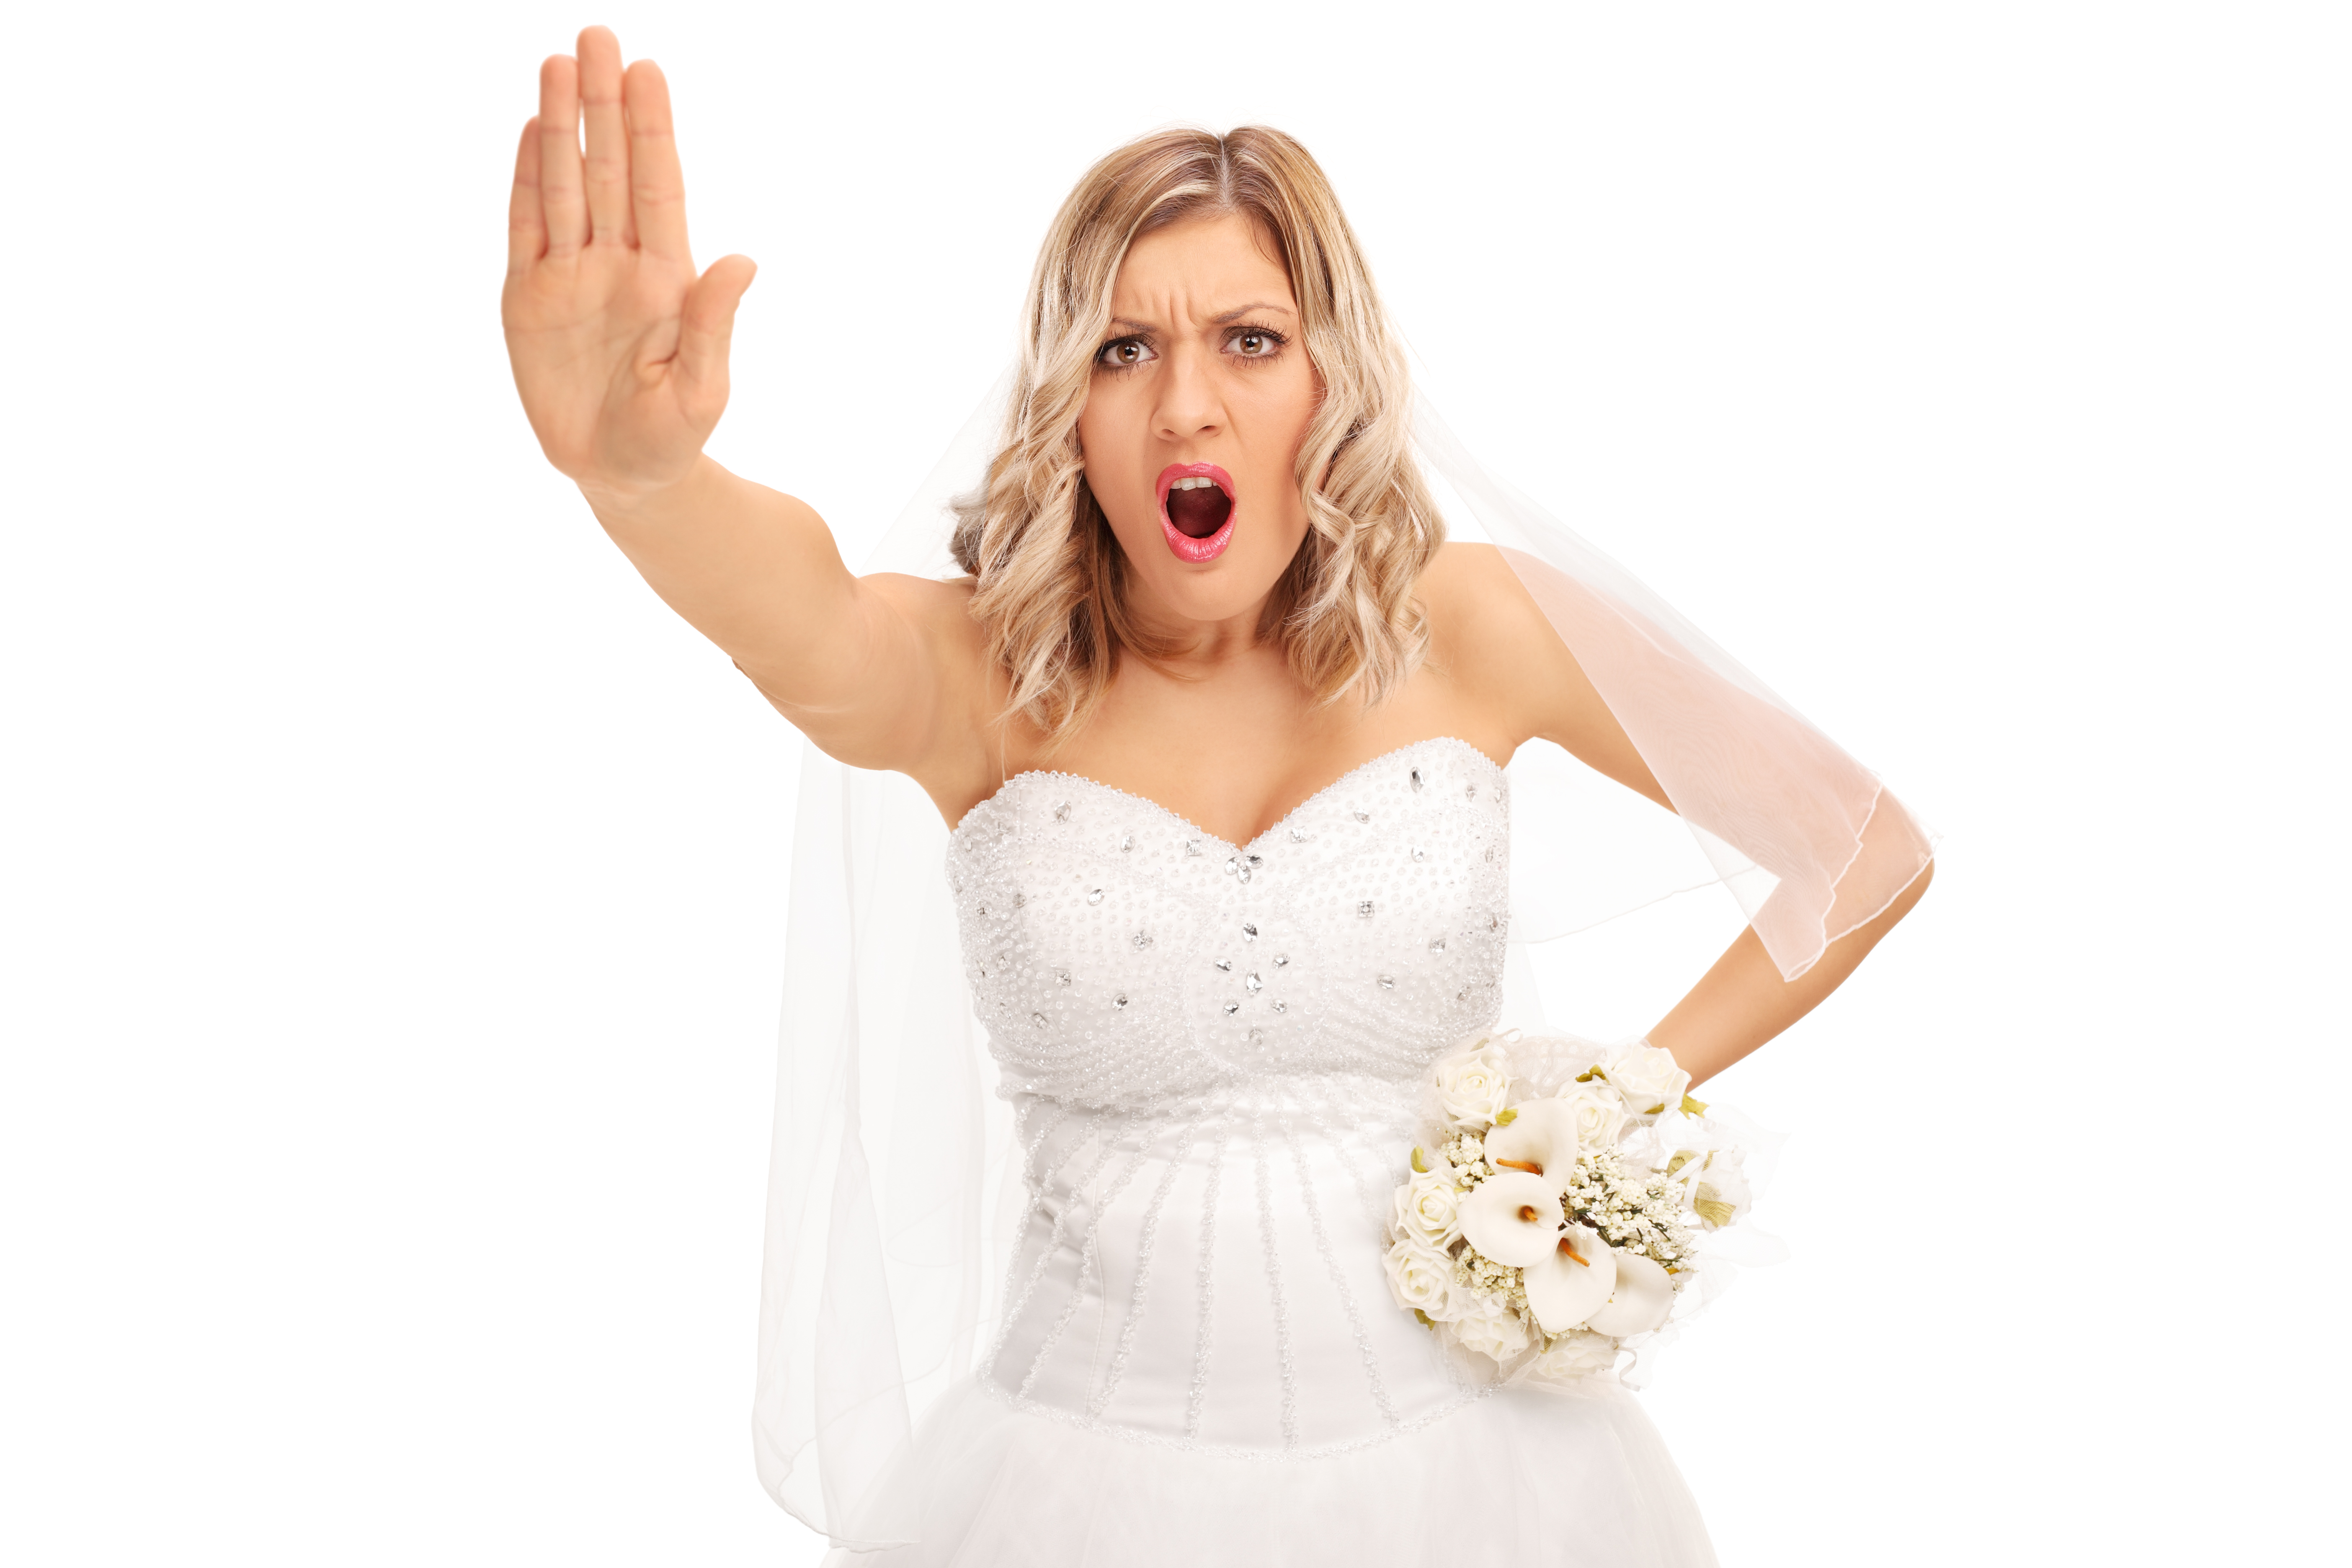 An angry bride stopping someone with her hand | Source: Shutterstock